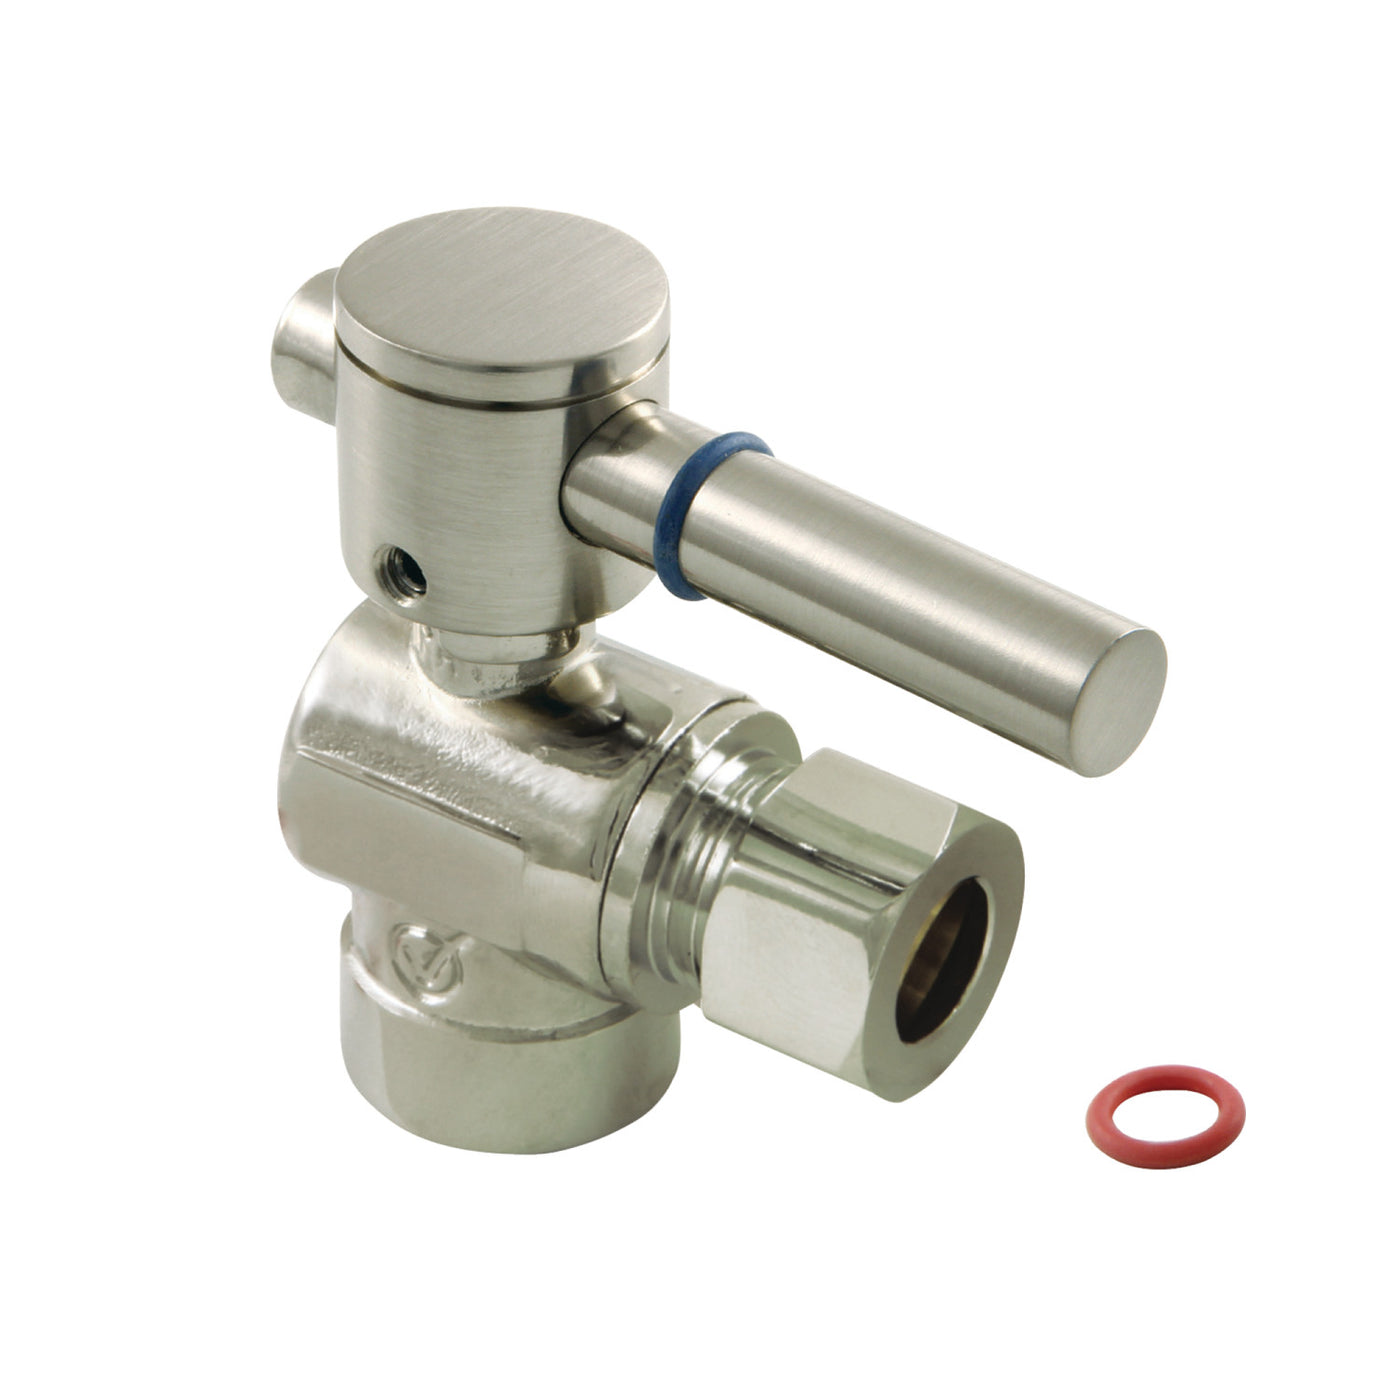 Elements of Design ECC43208DL 1/2-Inch Sweat x 3/8-Inch OD Comp Angle Stop Valve, Brushed Nickel